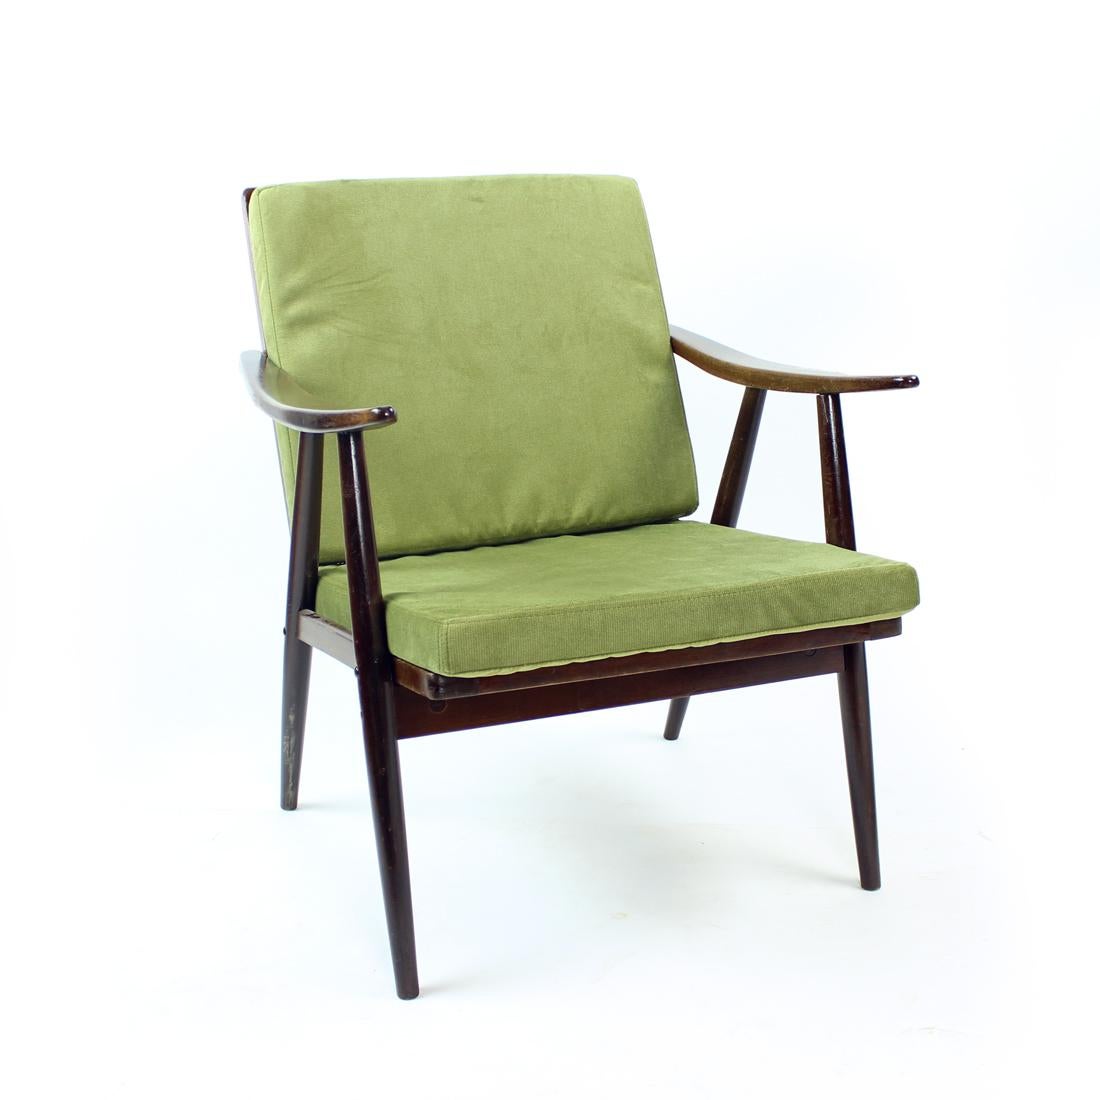 Beautiful Boomerang armchair, produced by TON in 1960s. Original Thonet design. This armchair has been fully restored into a dark stained oak. The design combines beautiful, elegant lines and details with a strong construction. The armchair has two